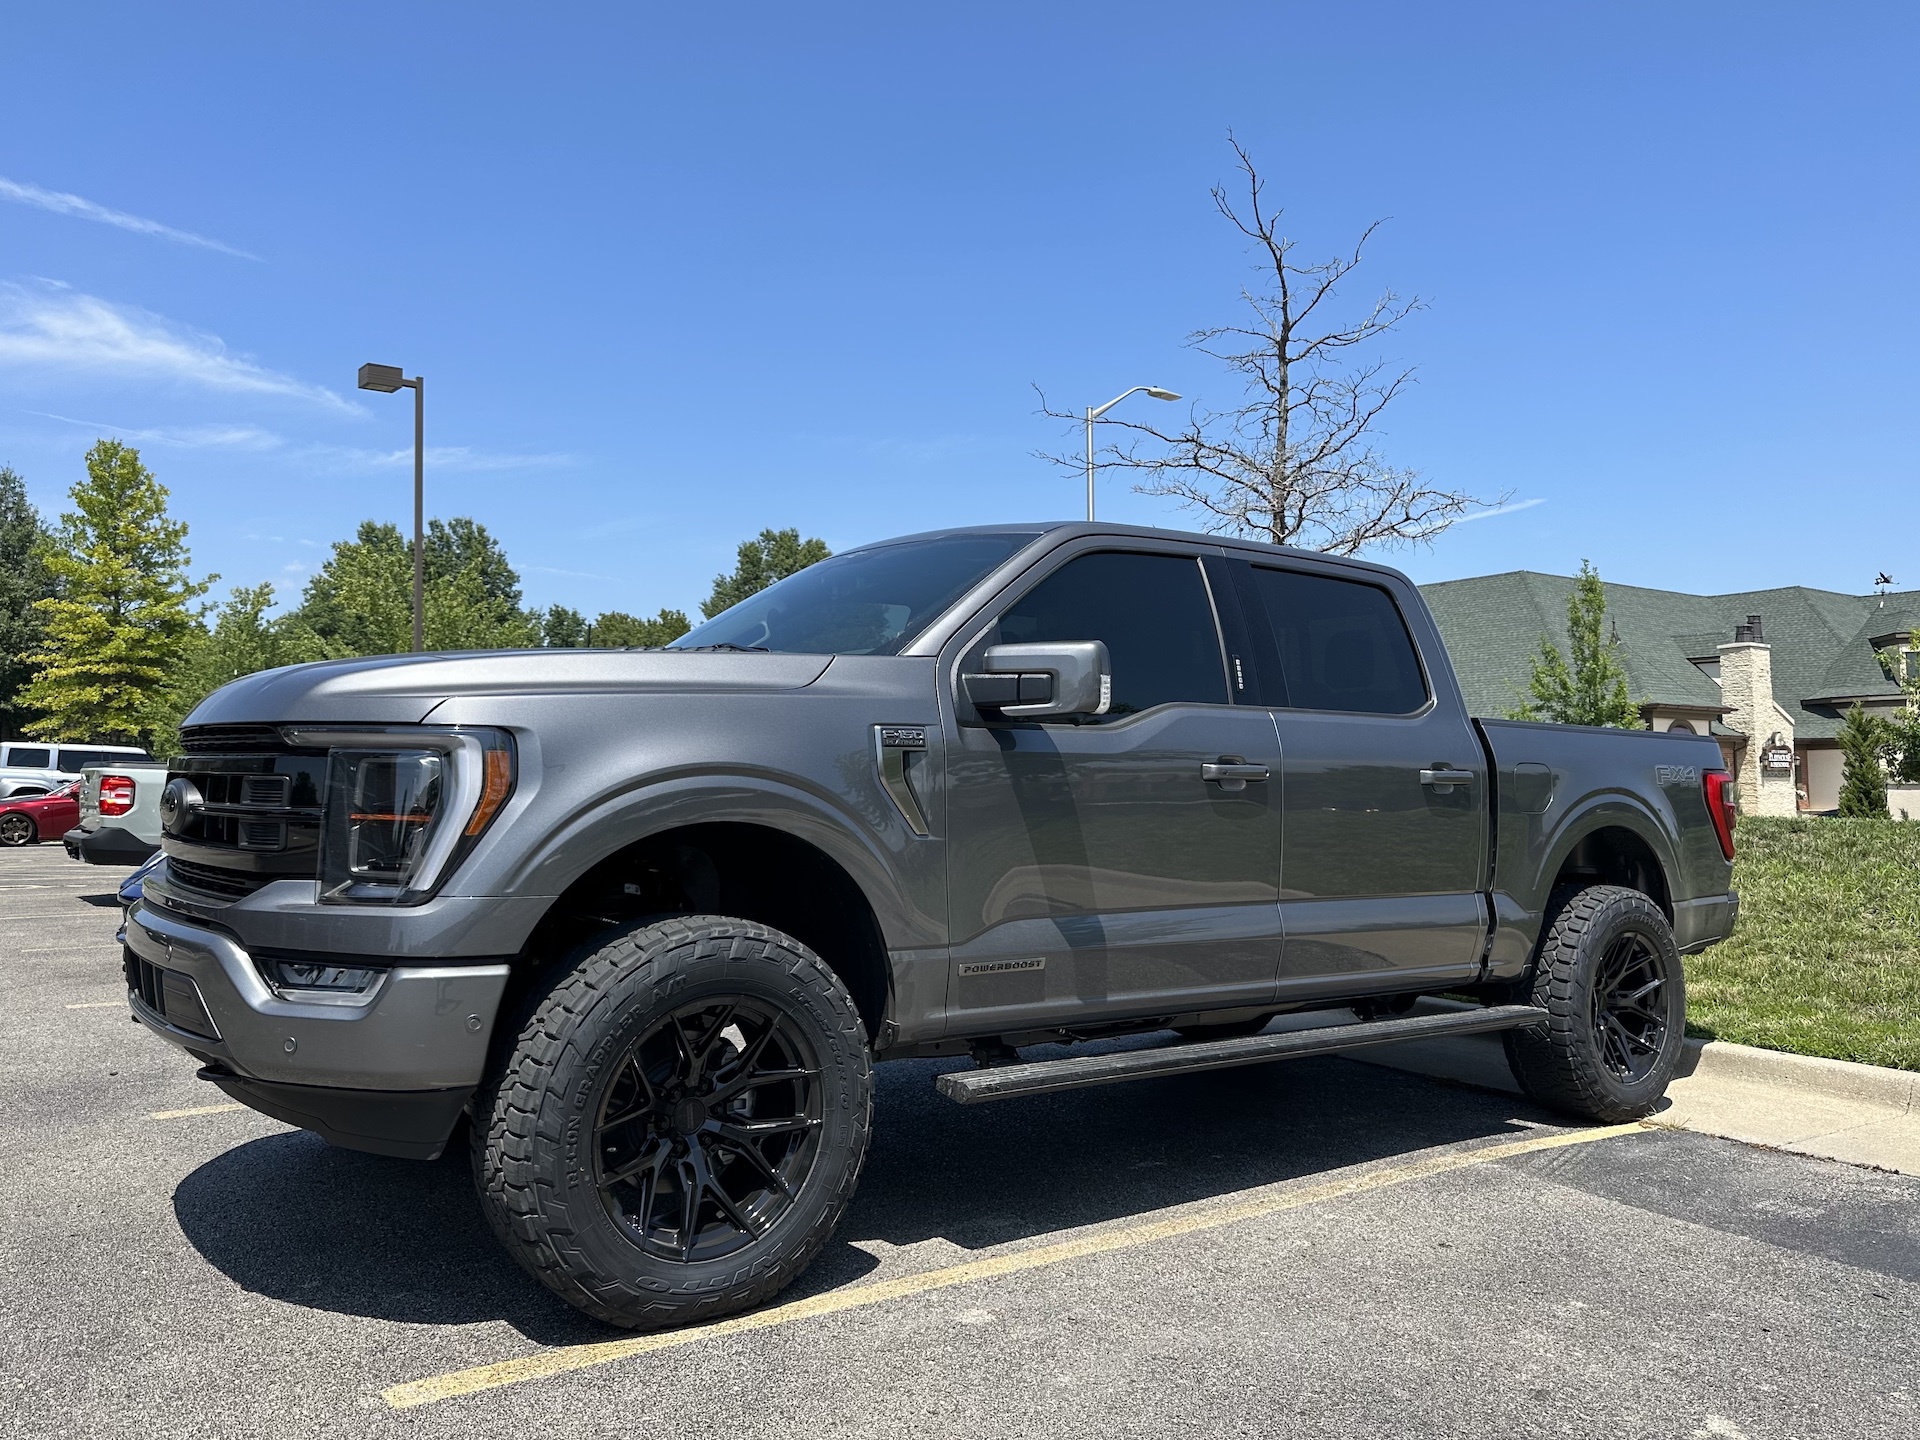  Ford F-150 with Vossen Hybrid Forged HF6-4